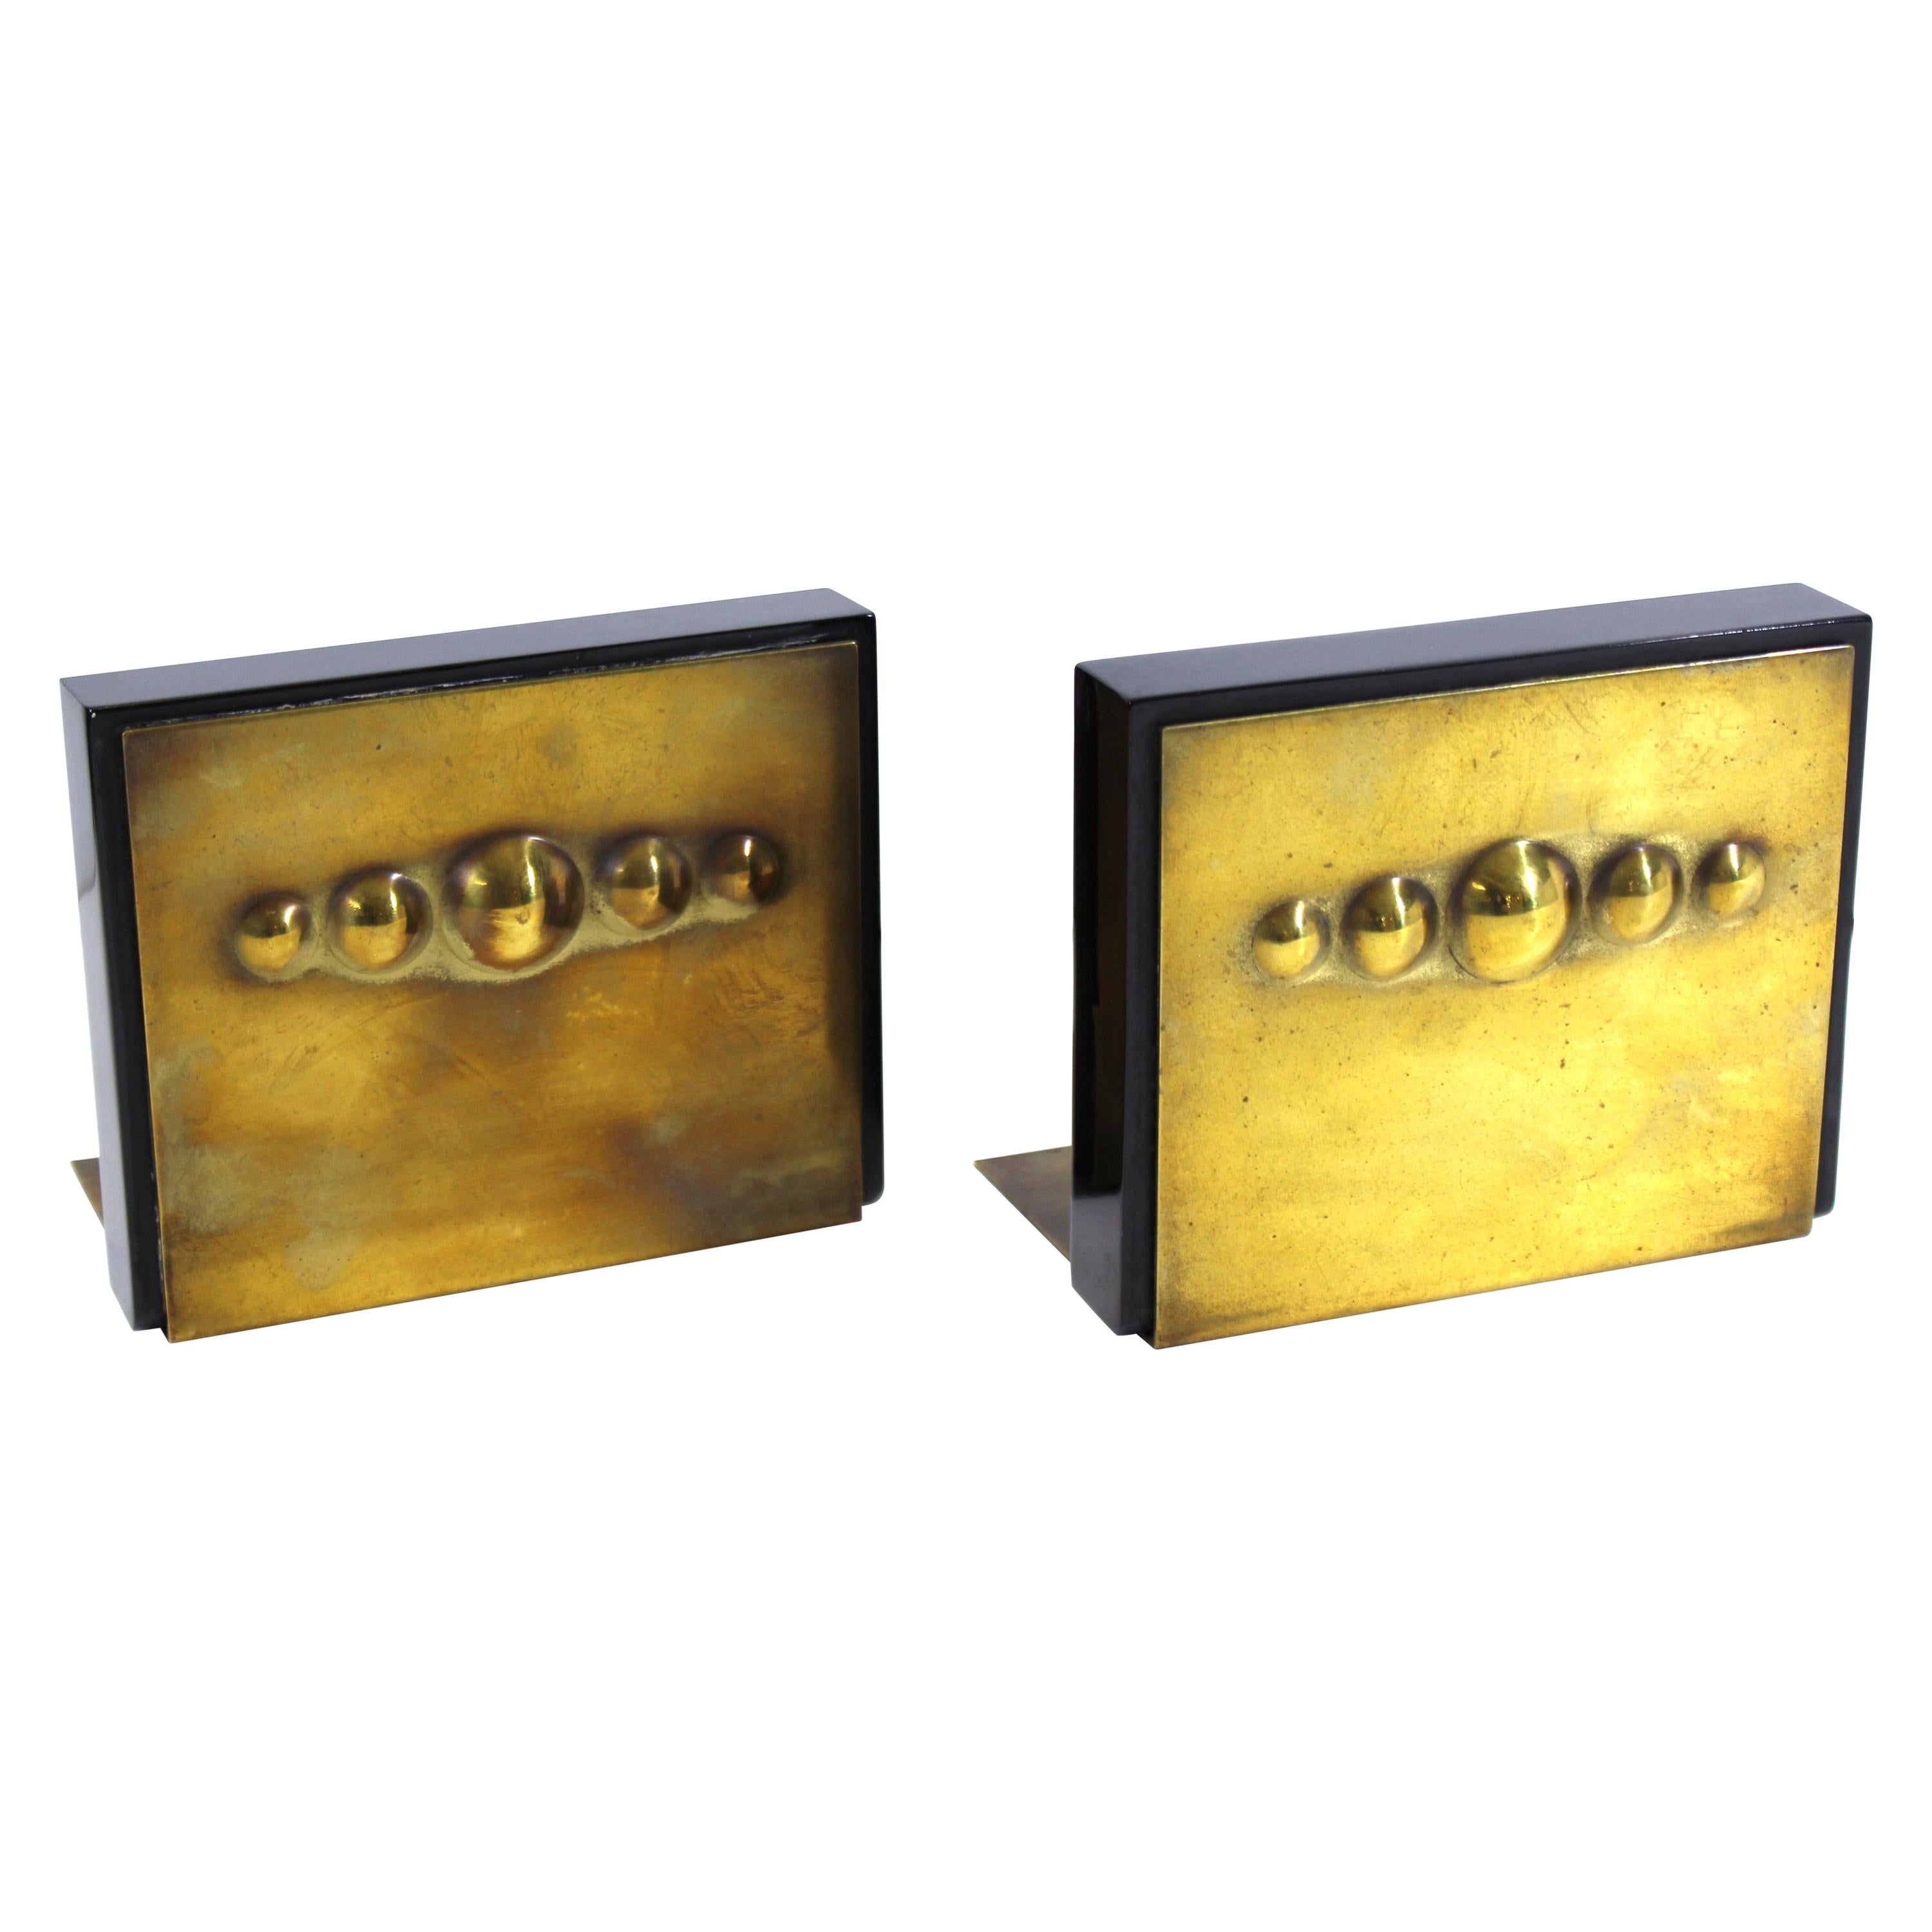 American Modernist Bookends in Solid Bakelite and Brass